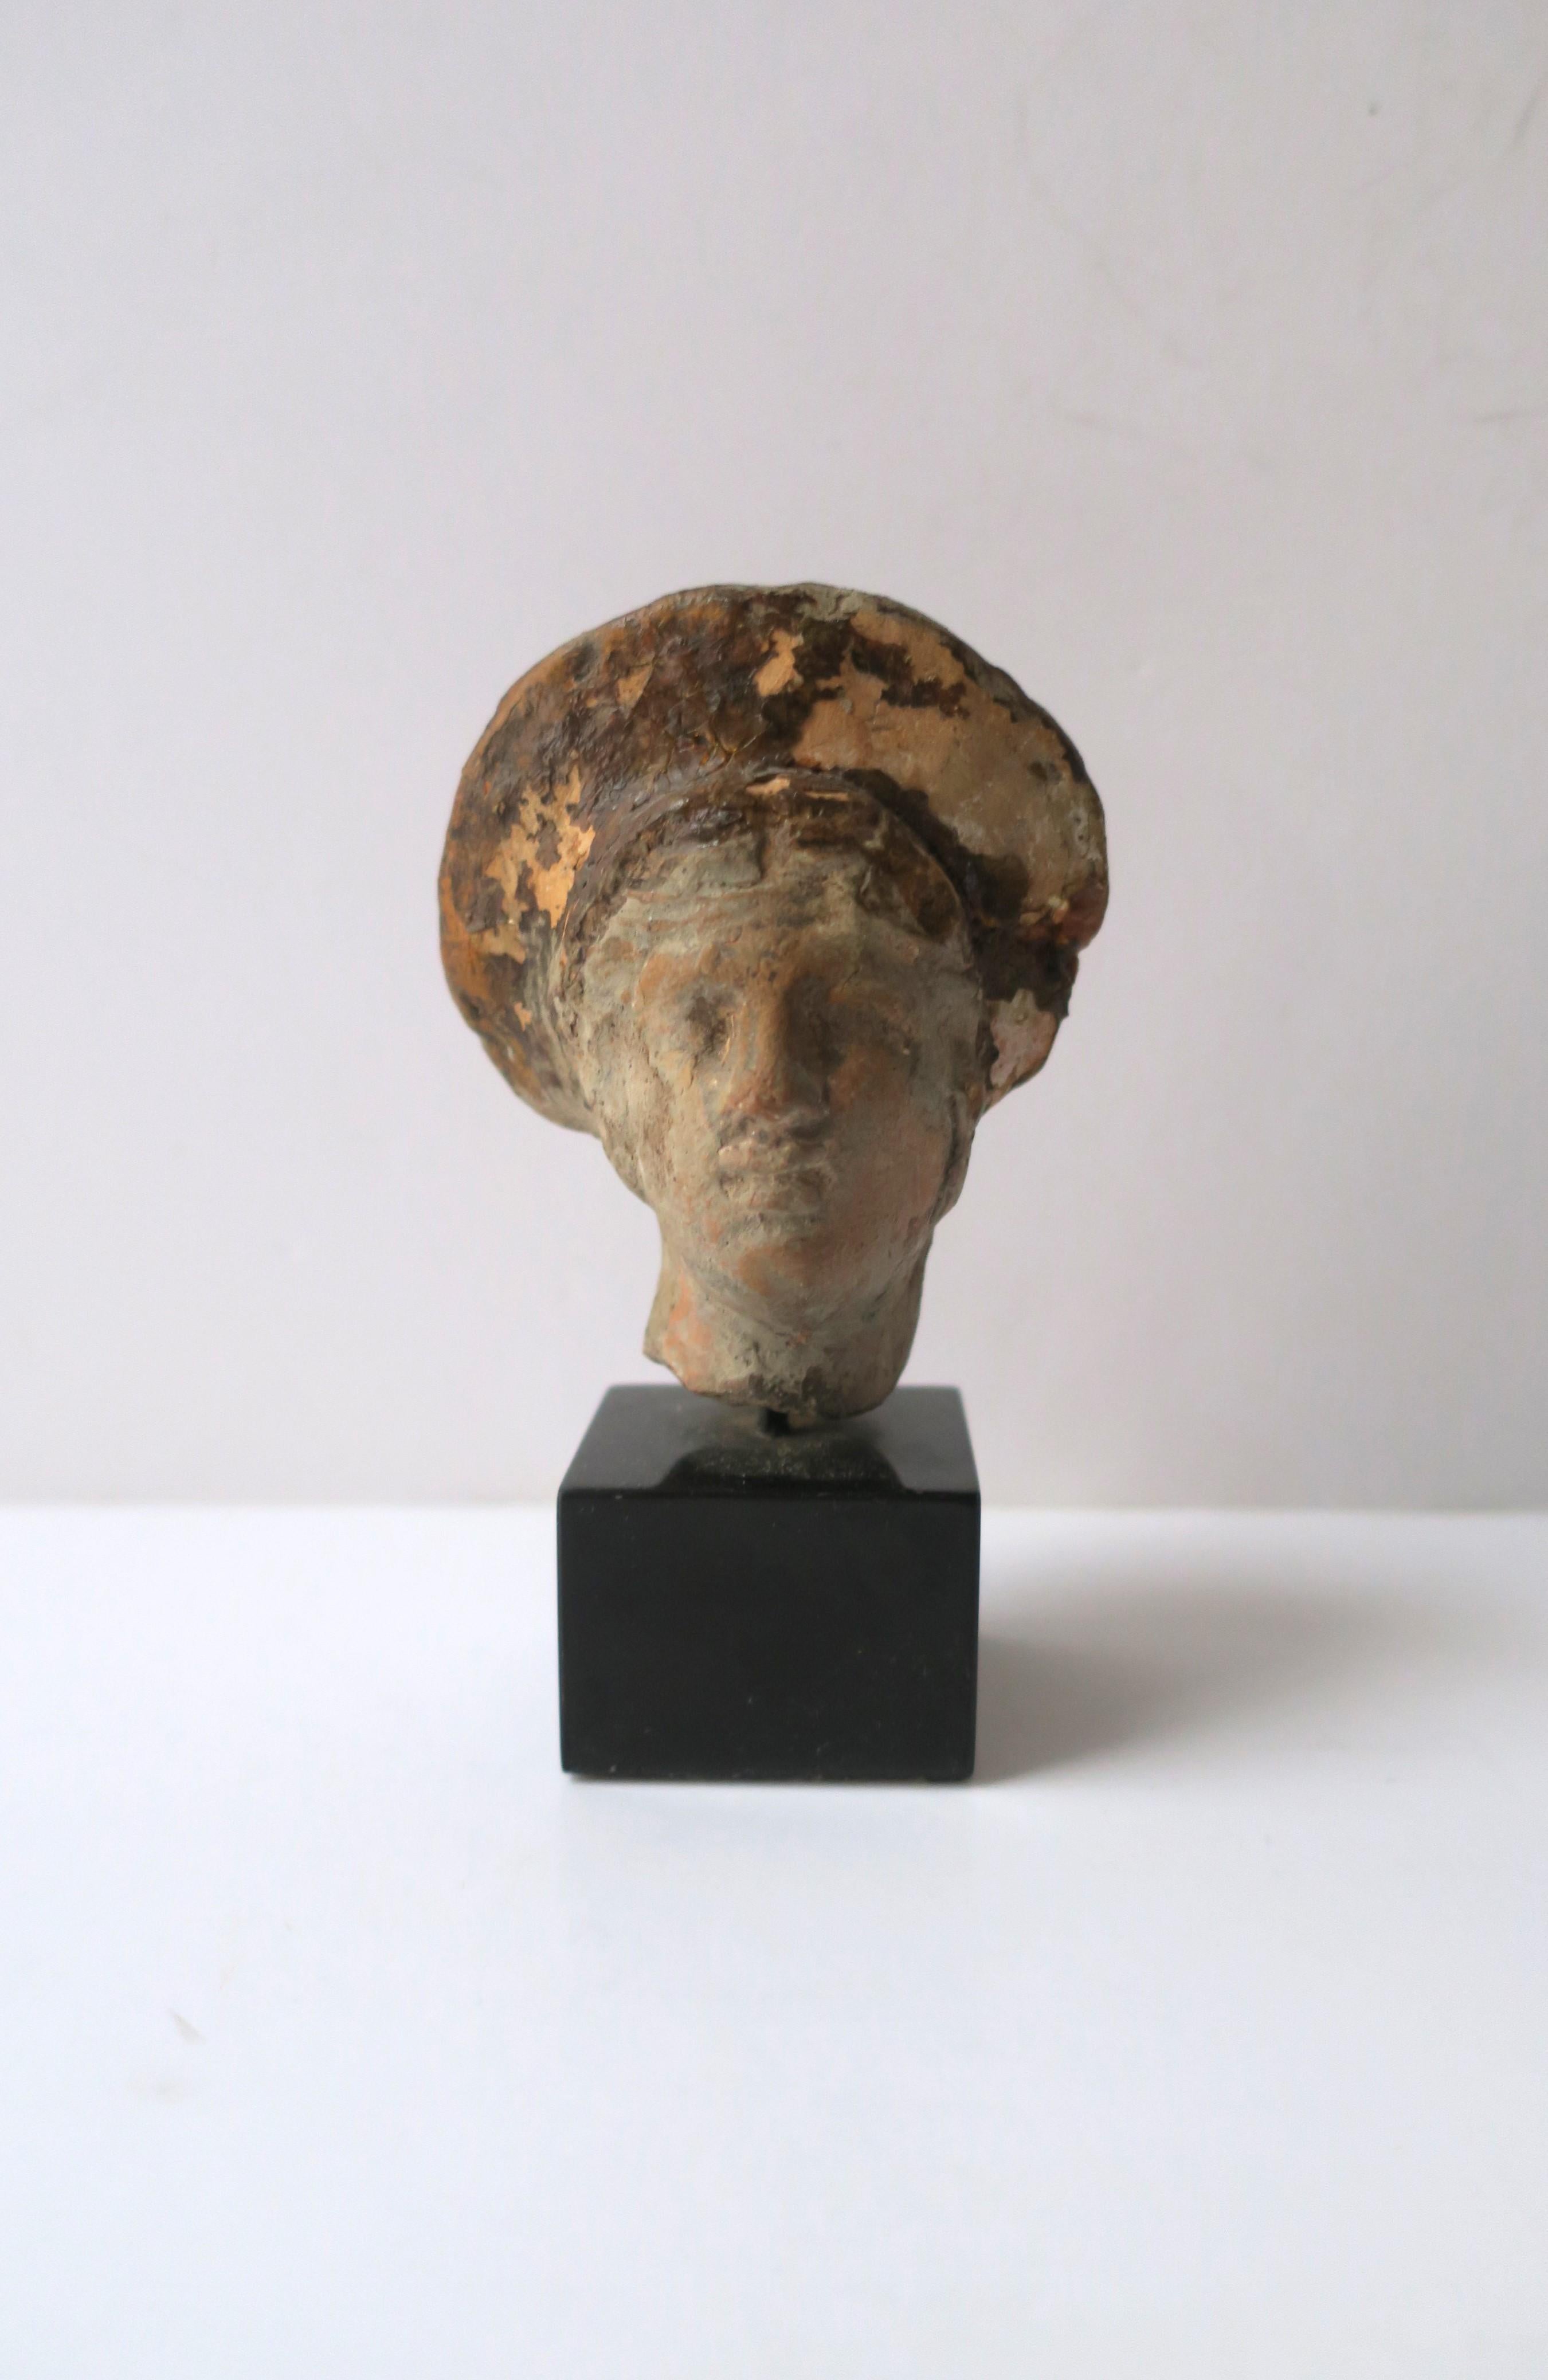 A hand-crafted terracotta head bust sculpture of a Greek Goddess on a black Belgium marble base, Europe, Greece. Exact date unknow. Artist/Sculptor unknown. This beautiful sculpture may work well on an end table, library, shelf, etc.

Dimensions: